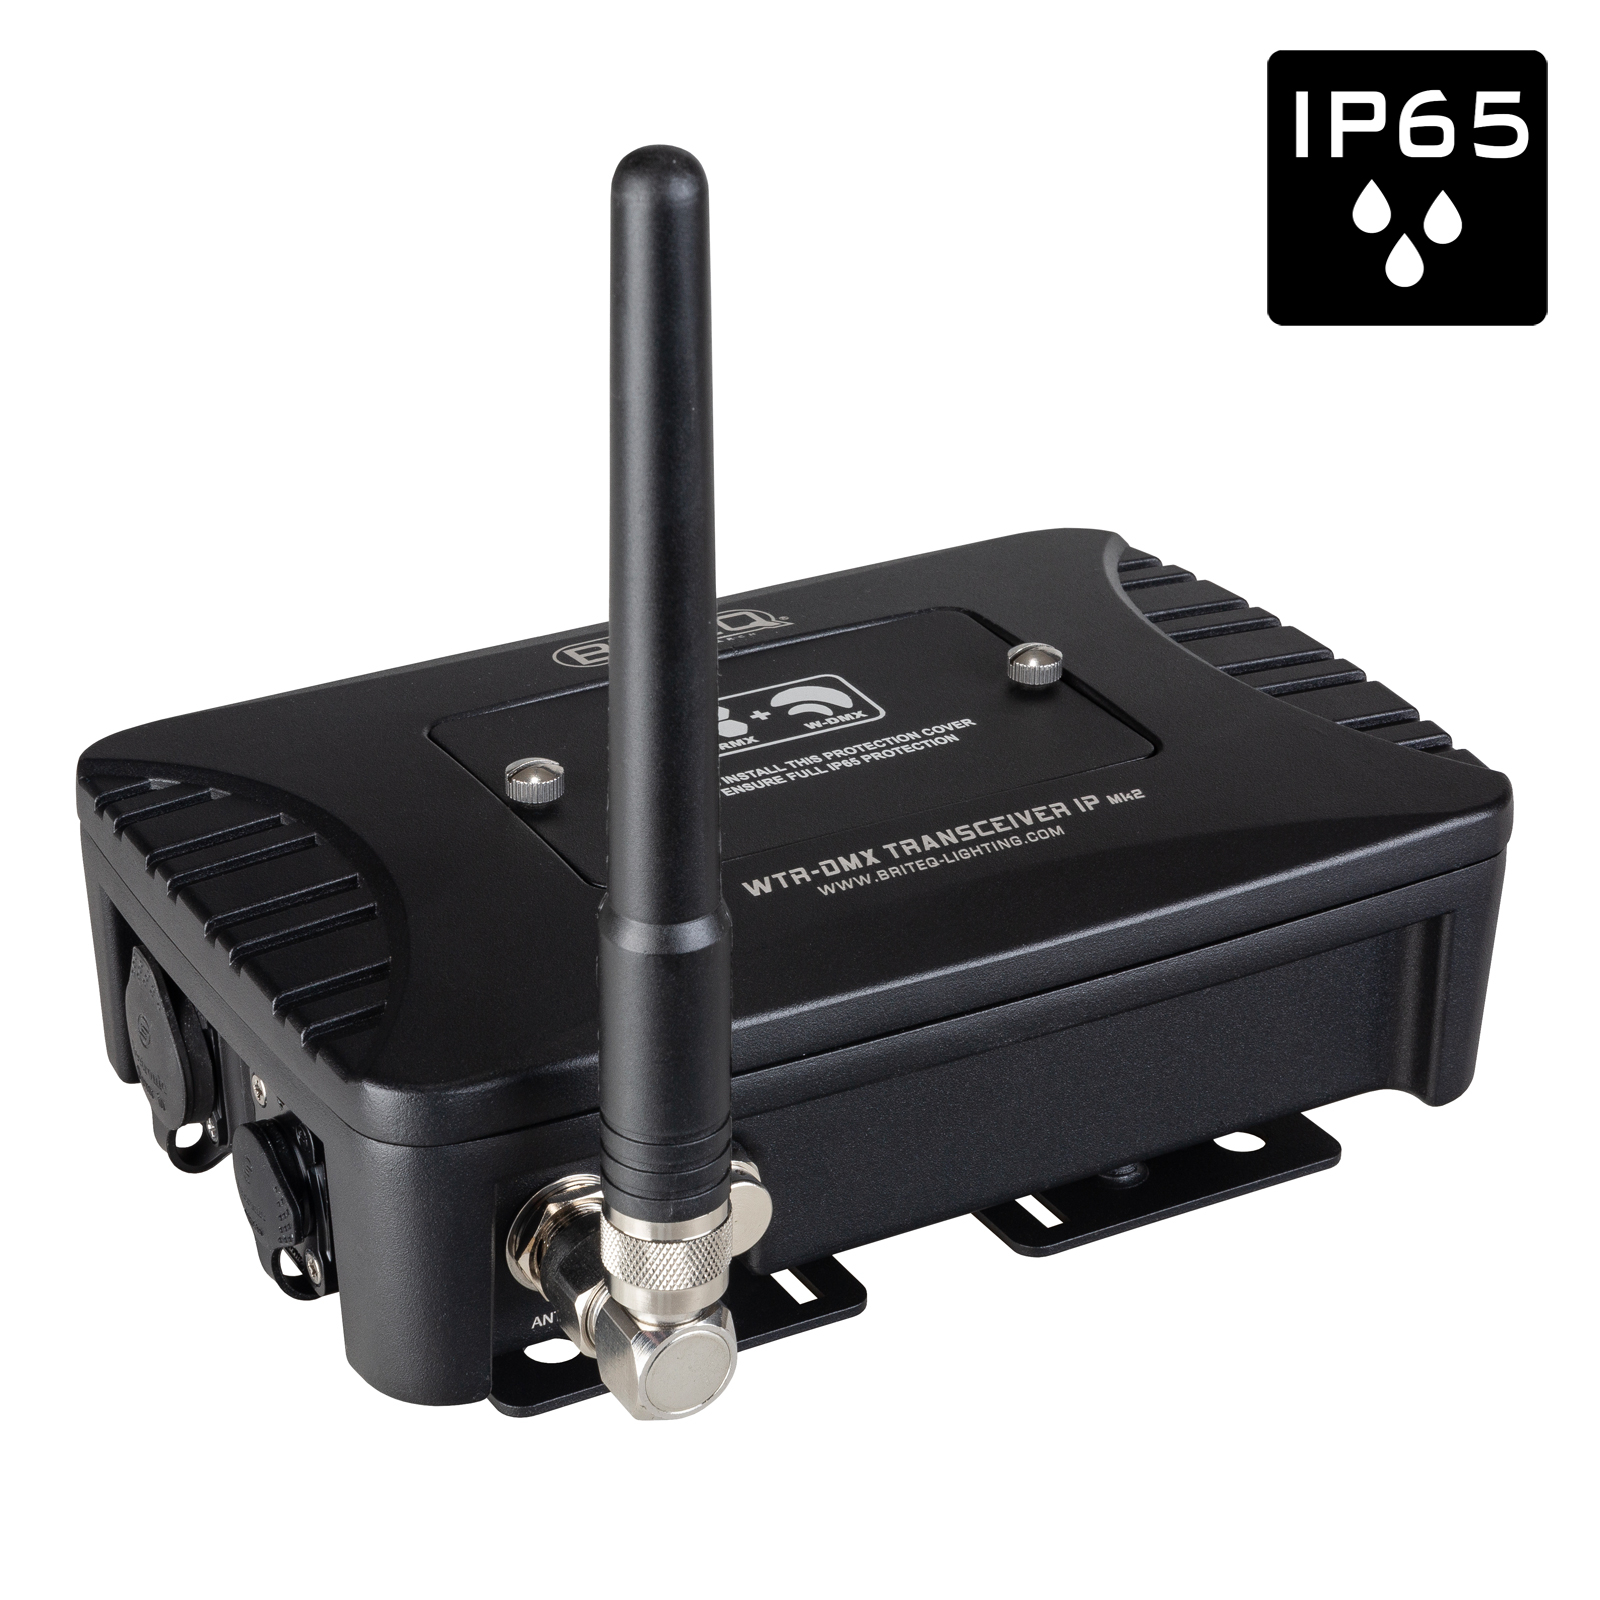 Outdoor IP65 wireless DMX-transceiver (transmitter + receiver), compatible with both LumenRadio- and Wireless Solution-.  Robust enclosure for fixed install and stage applications.